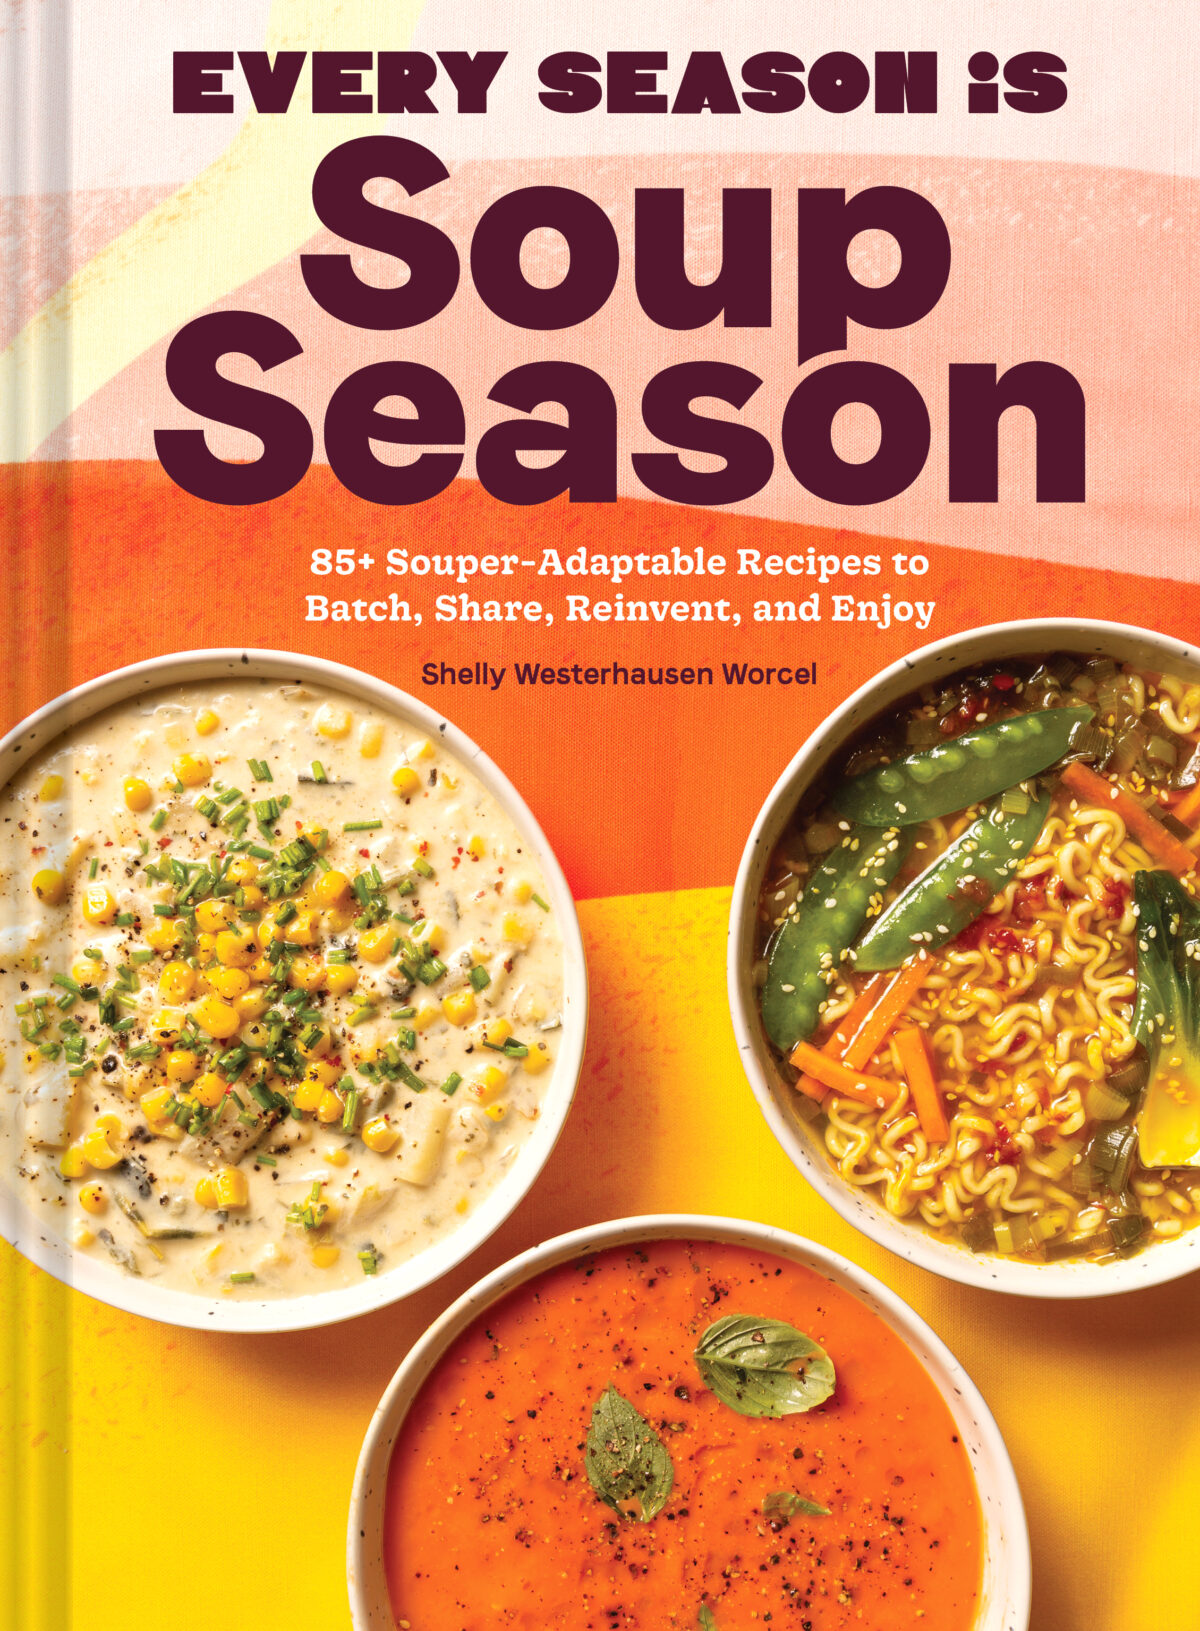 ANNOUNCING MY NEWEST COOKBOOK: EVERY SEASON IS